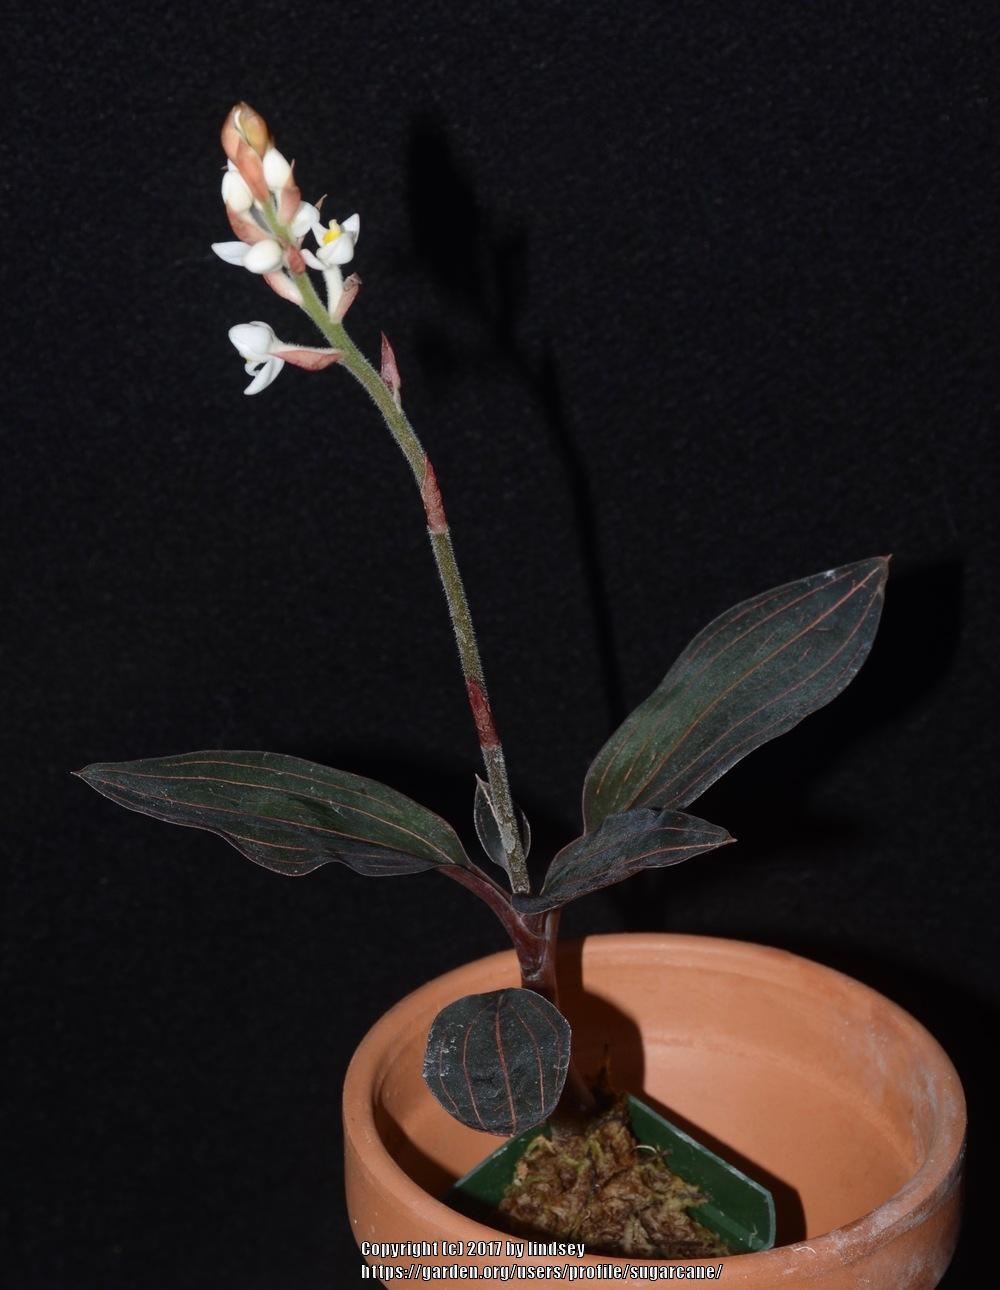 Photo of Jewel Orchid (Ludisia discolor) uploaded by sugarcane